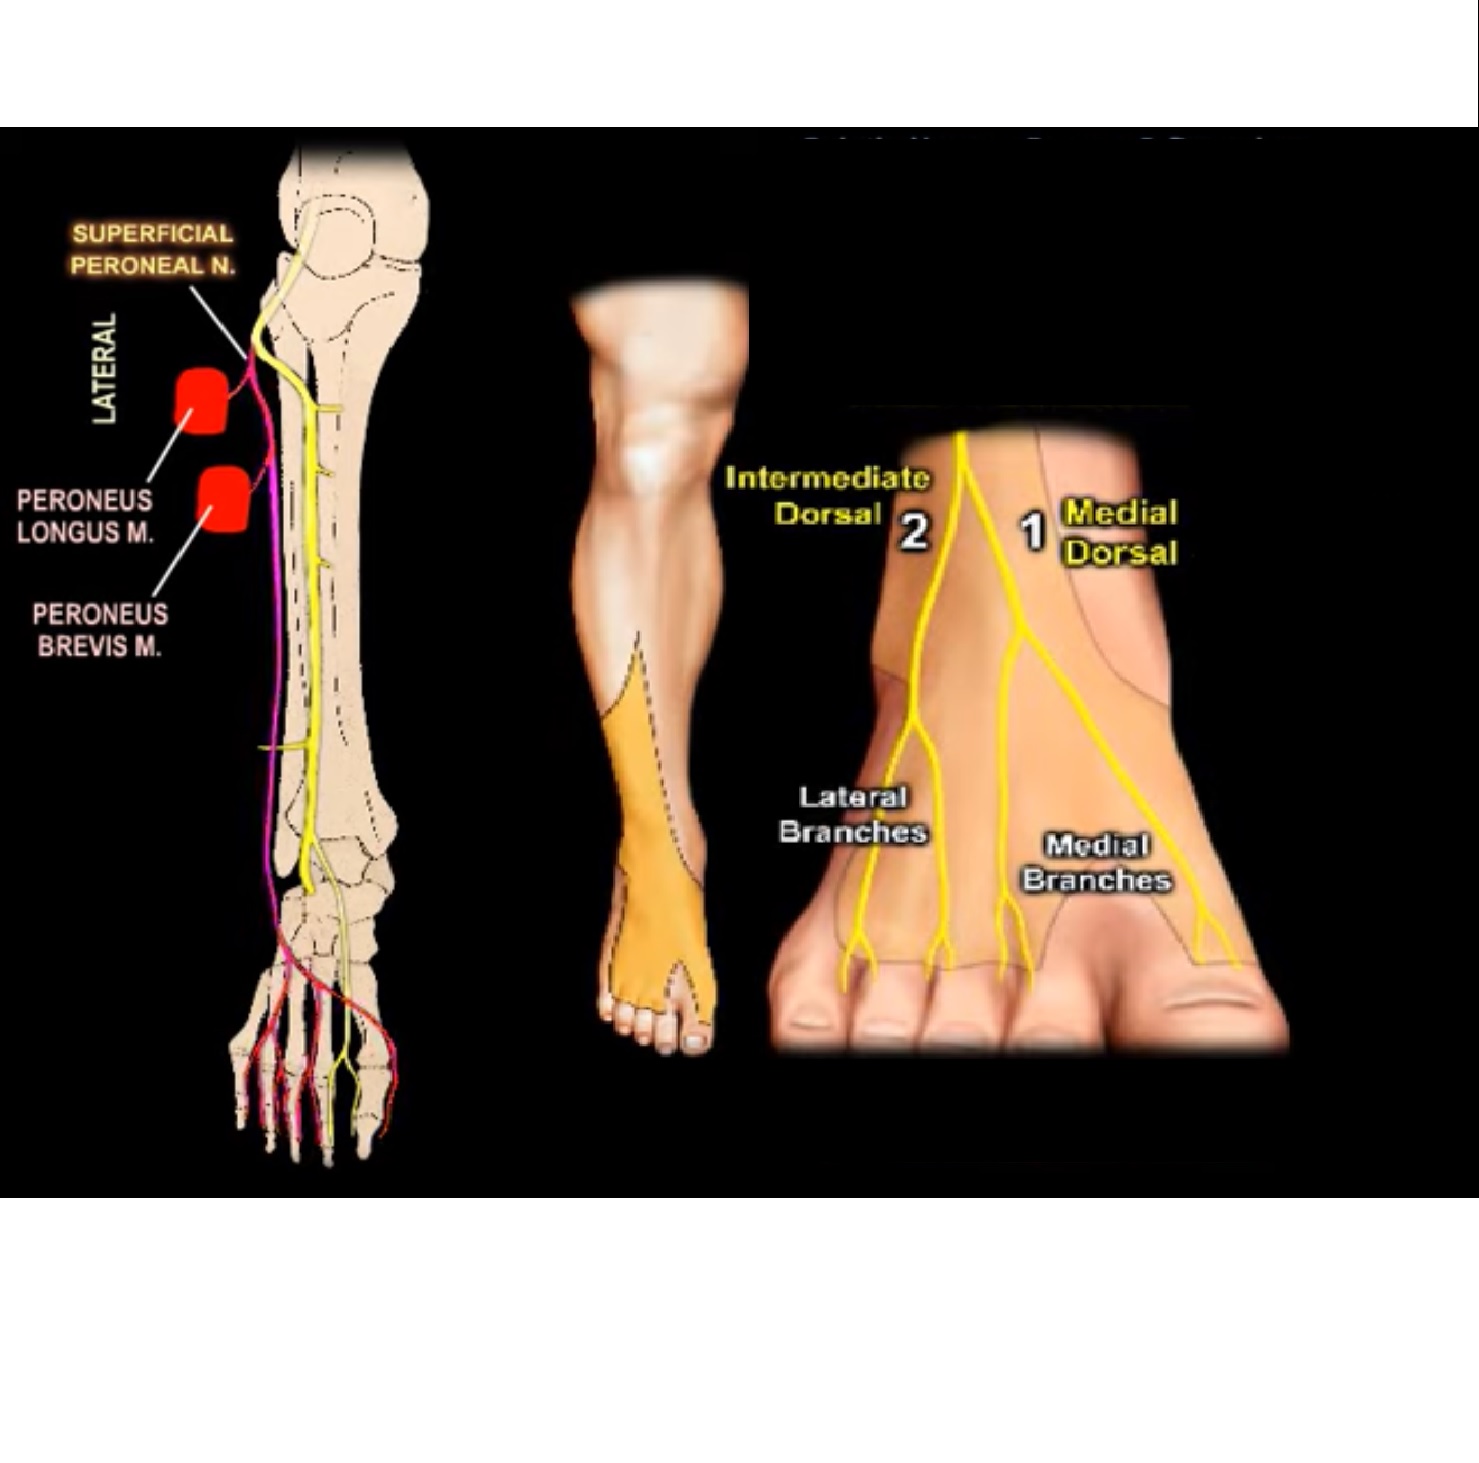 What part of the foot does the sciatic nerve affect?